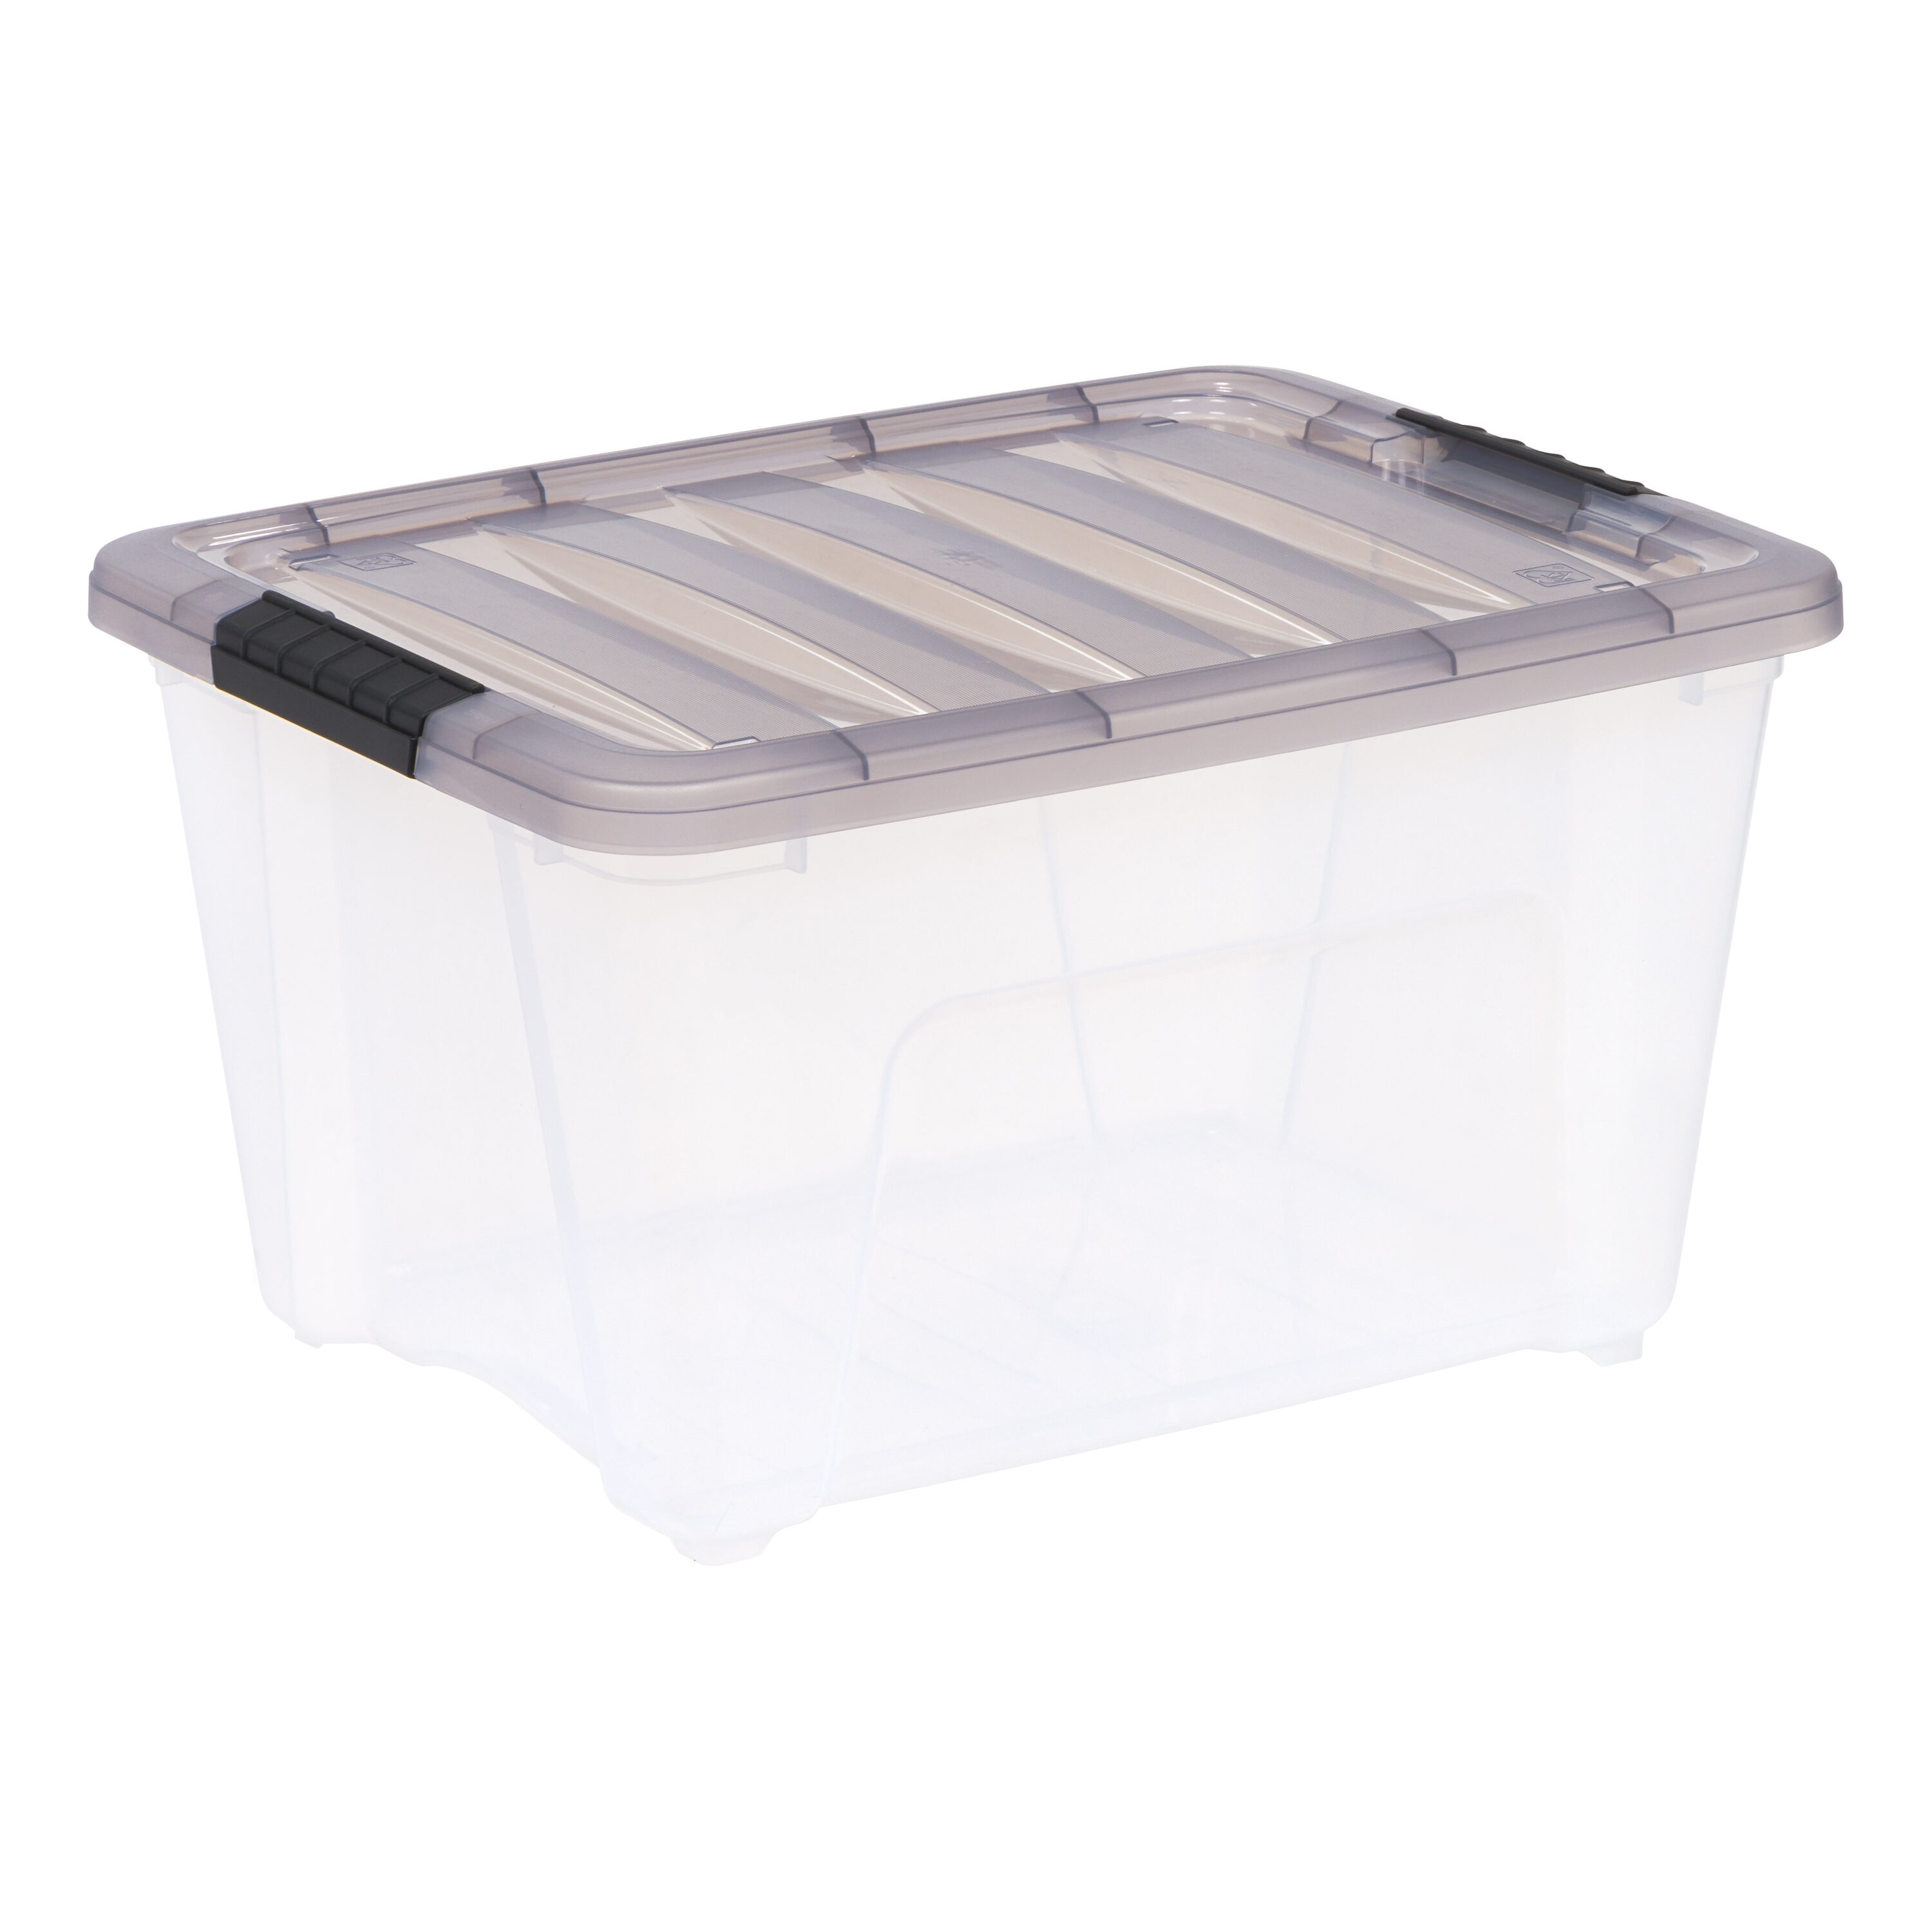 Met Lux 12 qt Square Clear Plastic Food Storage Container - with Blue Volume Markers - 11 inch x 11 inch x 8 inch - 10 Count Box